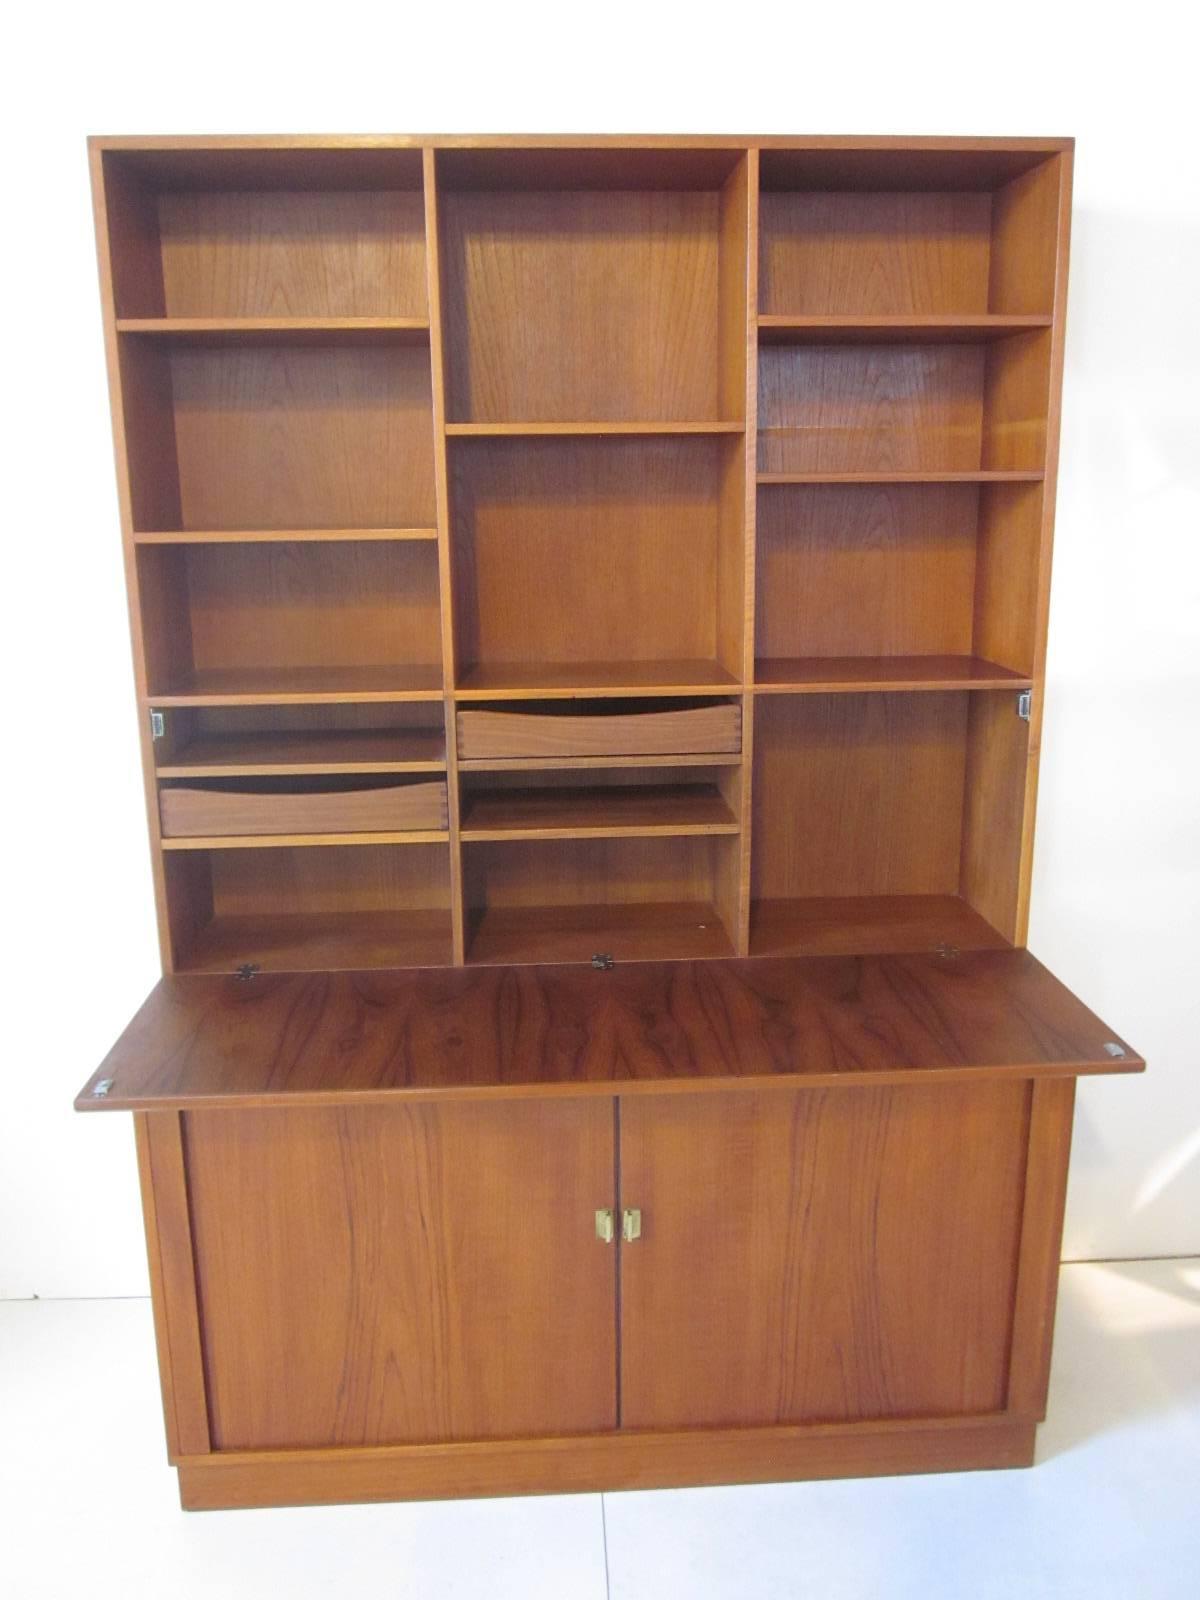 A teakwood secretary and bookcase with lower tambour door credenza, two pull out drawers and shelves with storage. The upper section has a pull down door revealing a desk top with two drawers and shelves. Retains the manufactures markings, ink stamp